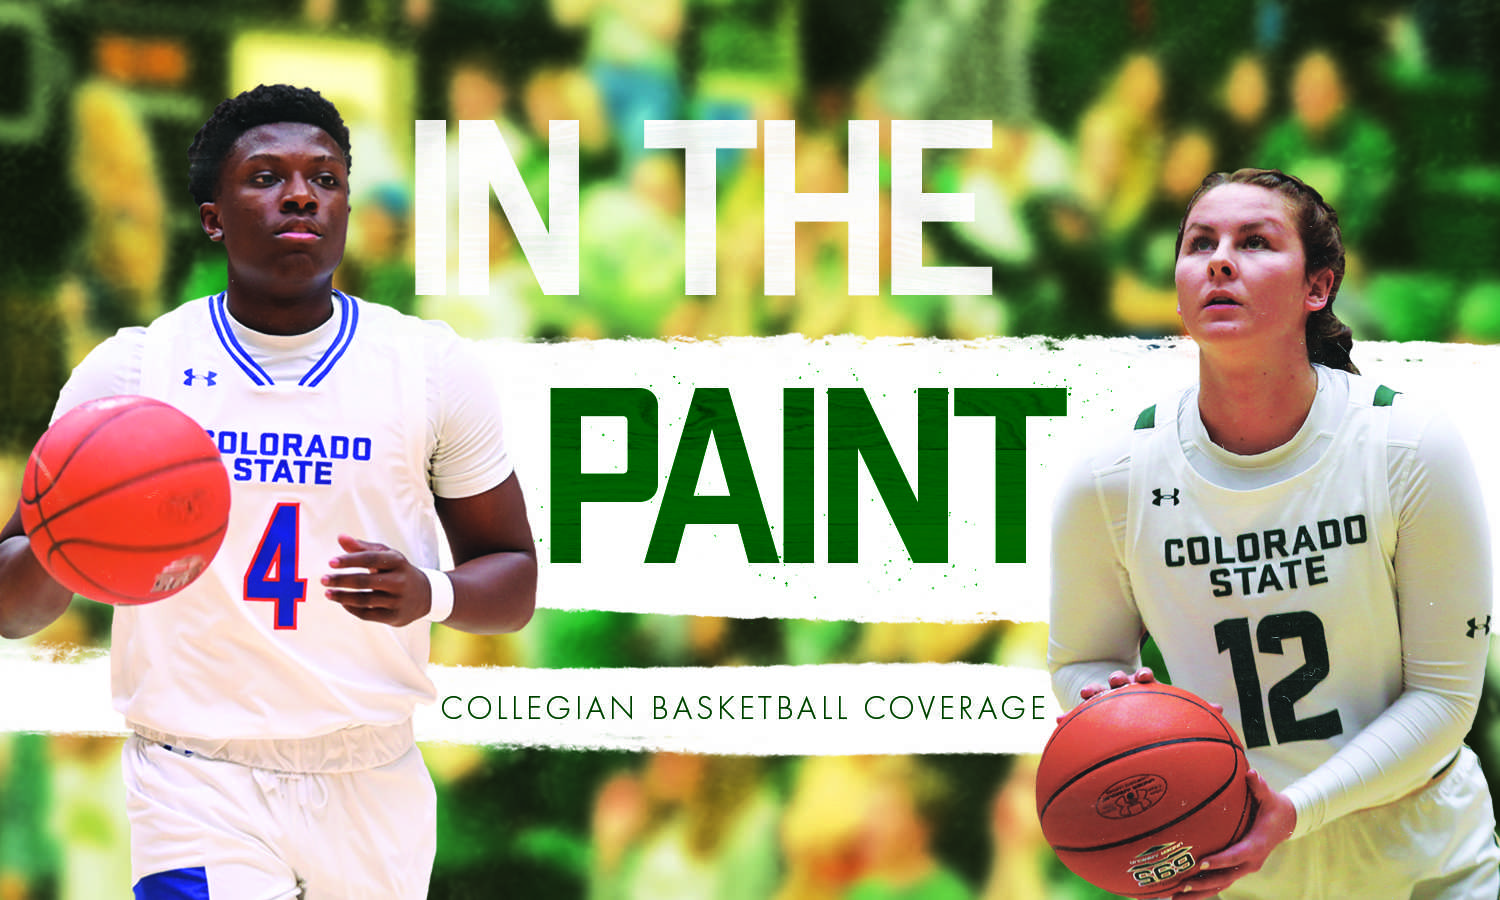 Photo illustration show an image of both male and female basketball players with the text "In the Paint, Collegian Basketball Coverage"